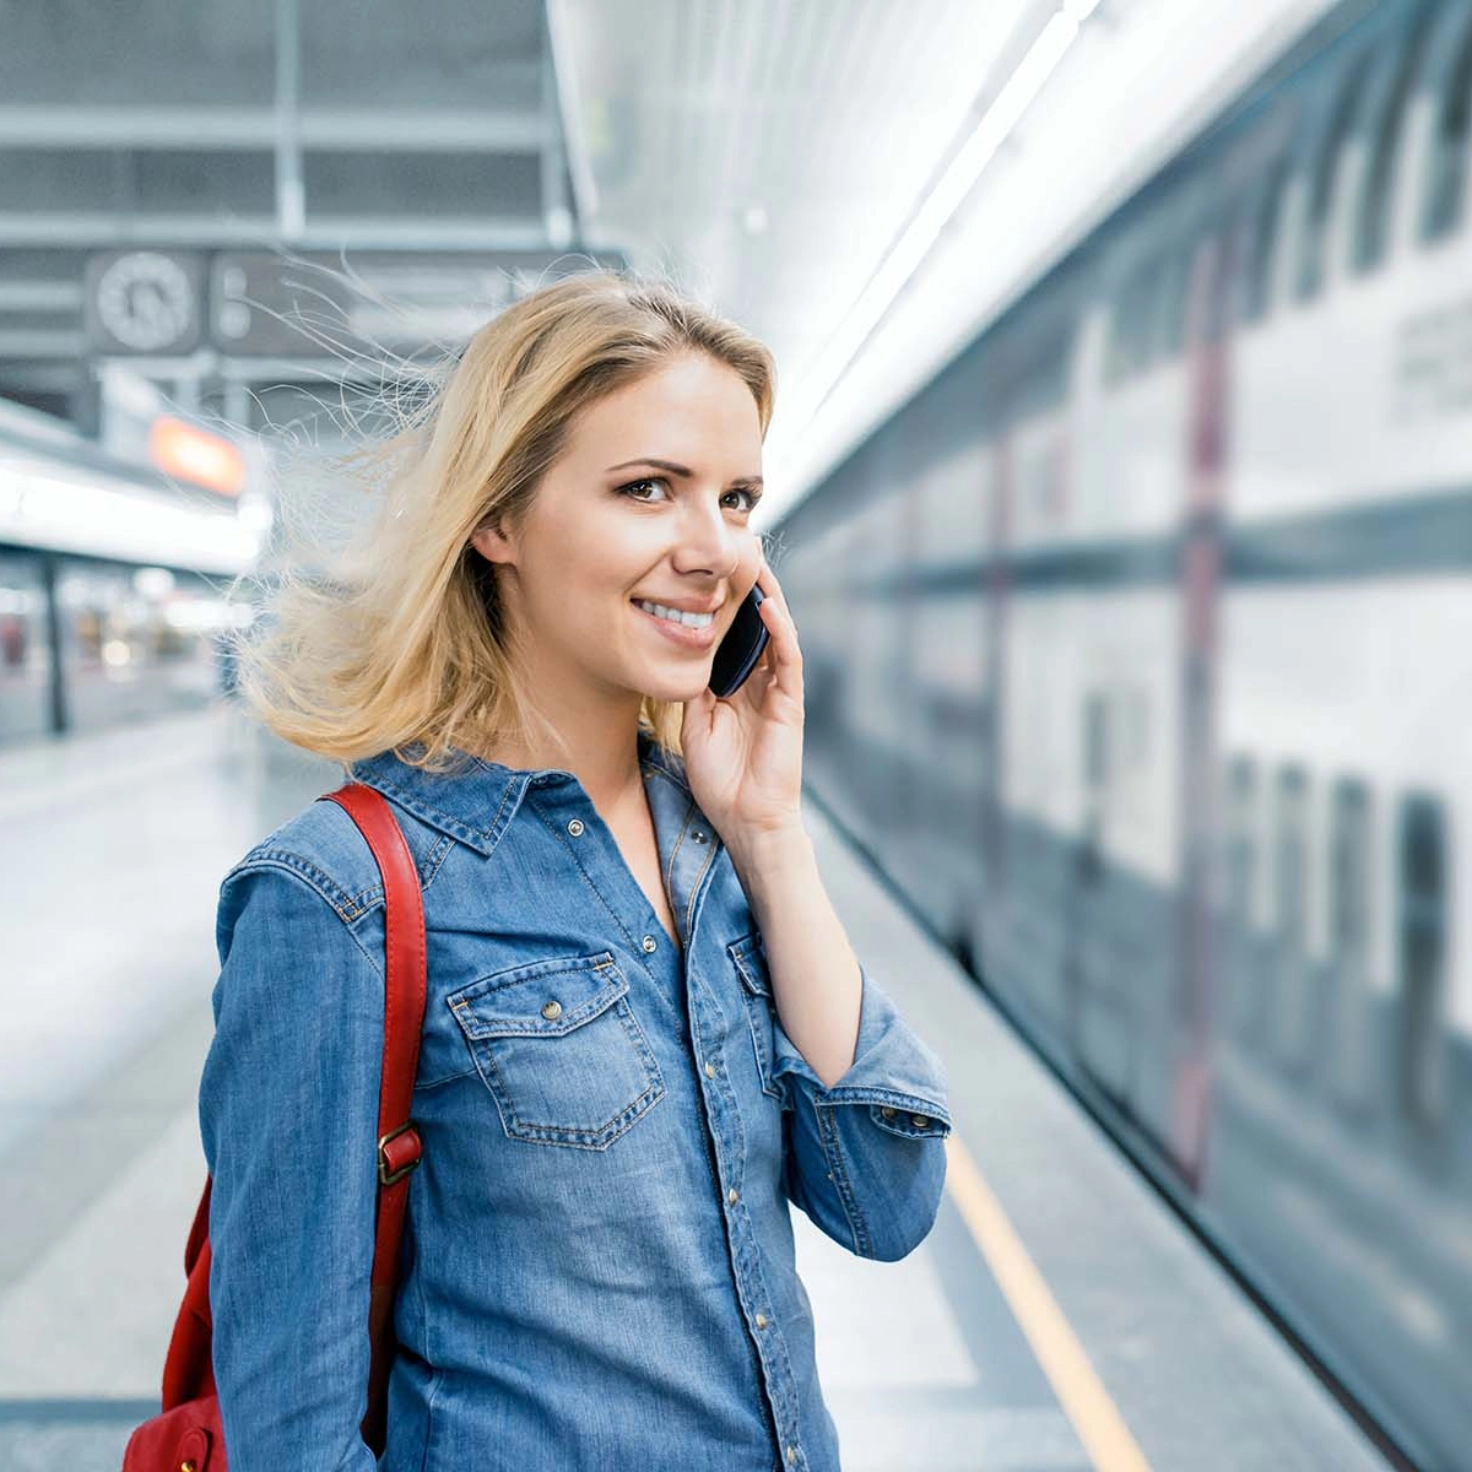 Woman talking on her mobile phone on the platform